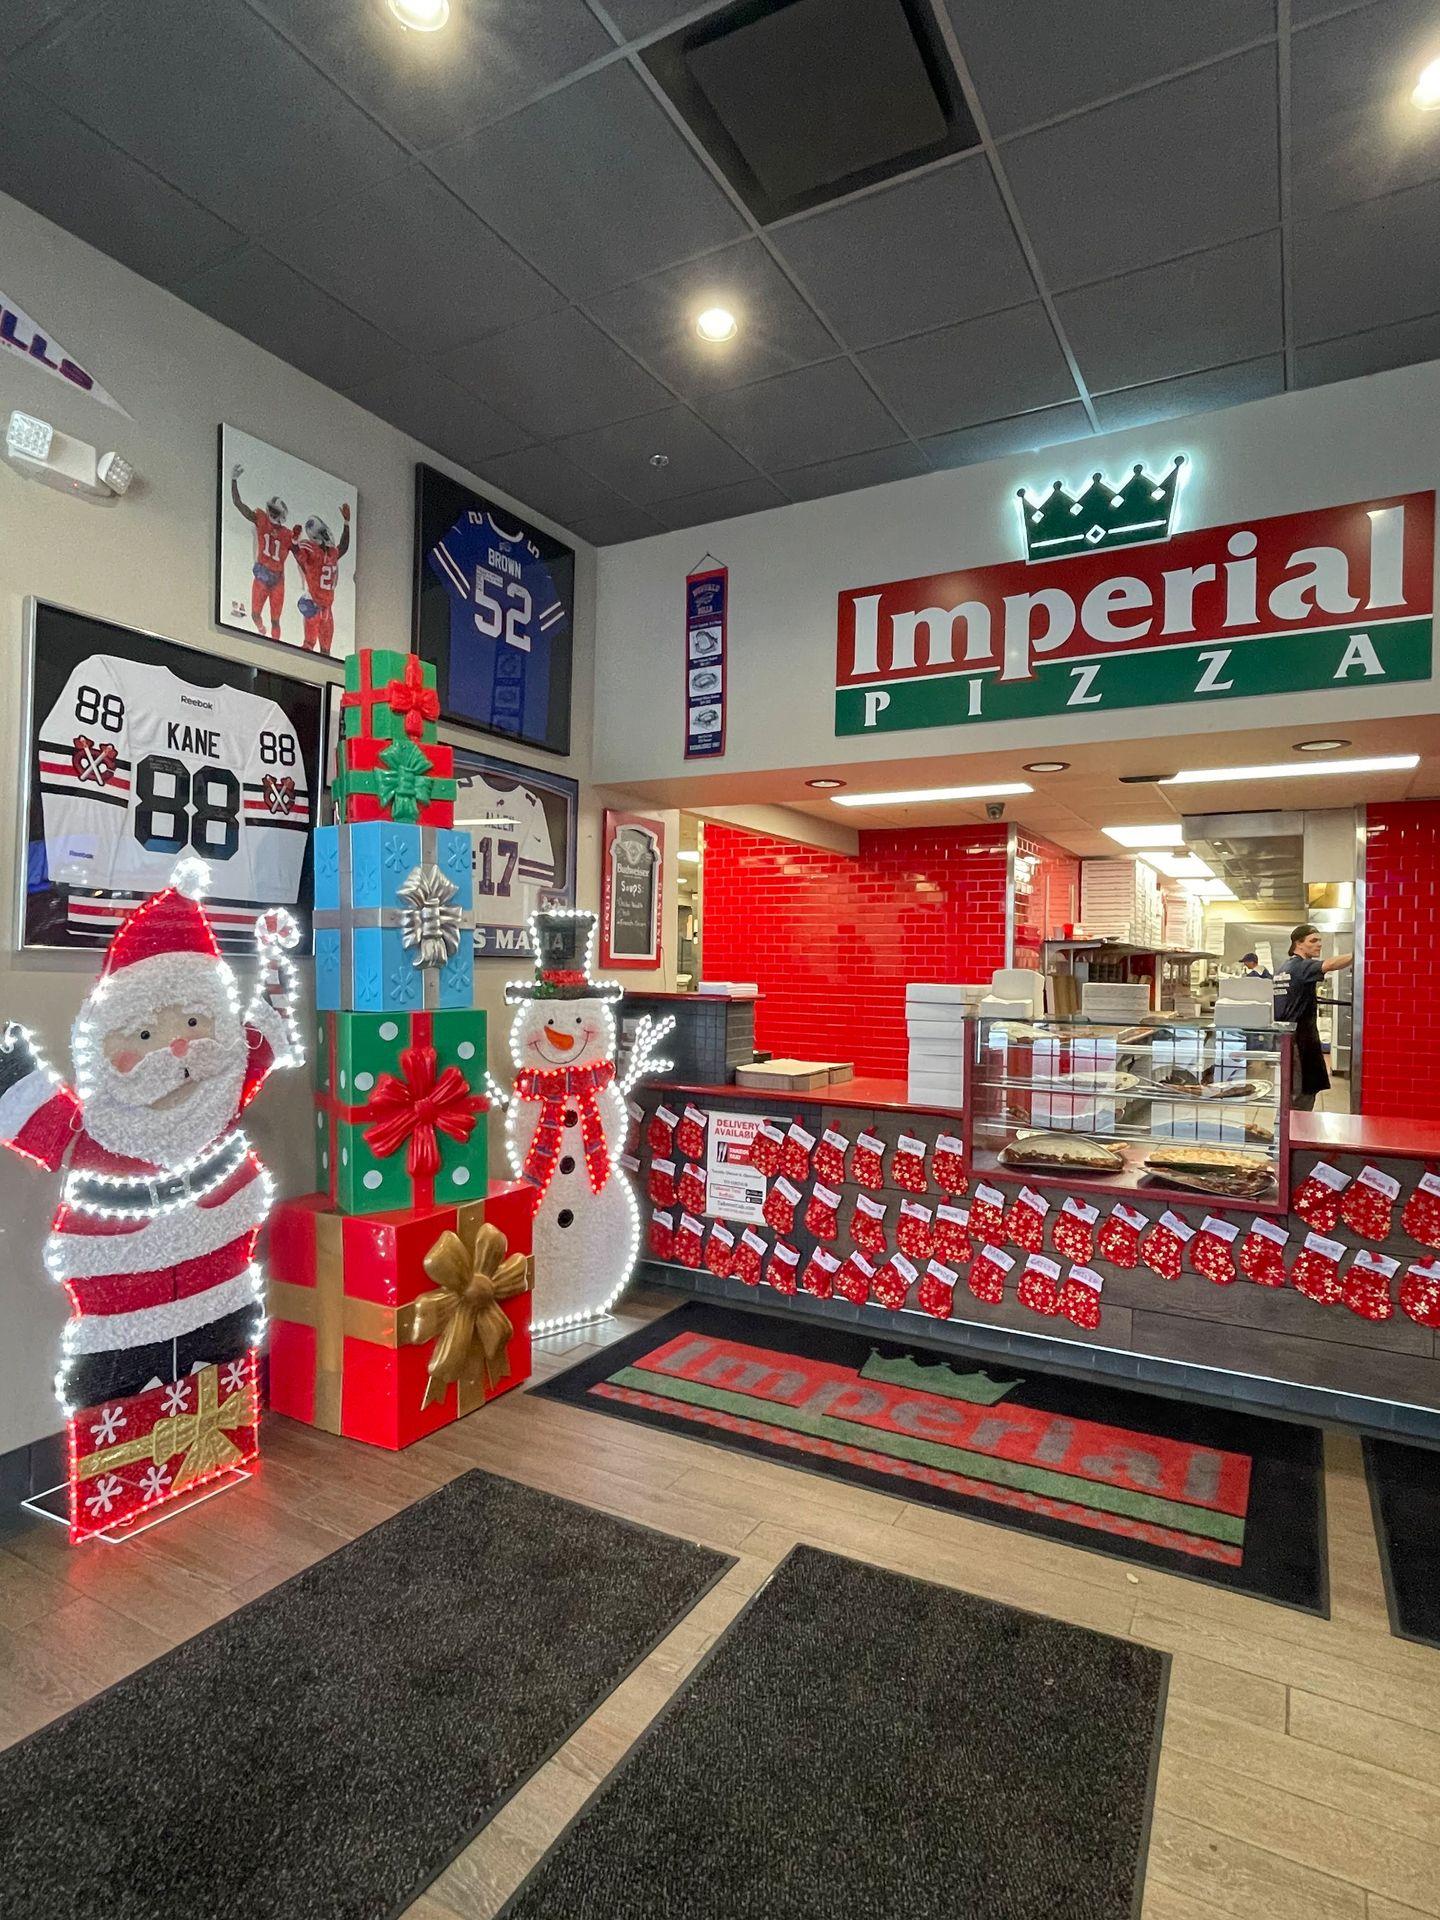 The interior of Imperial Pizza with Christmas decor.